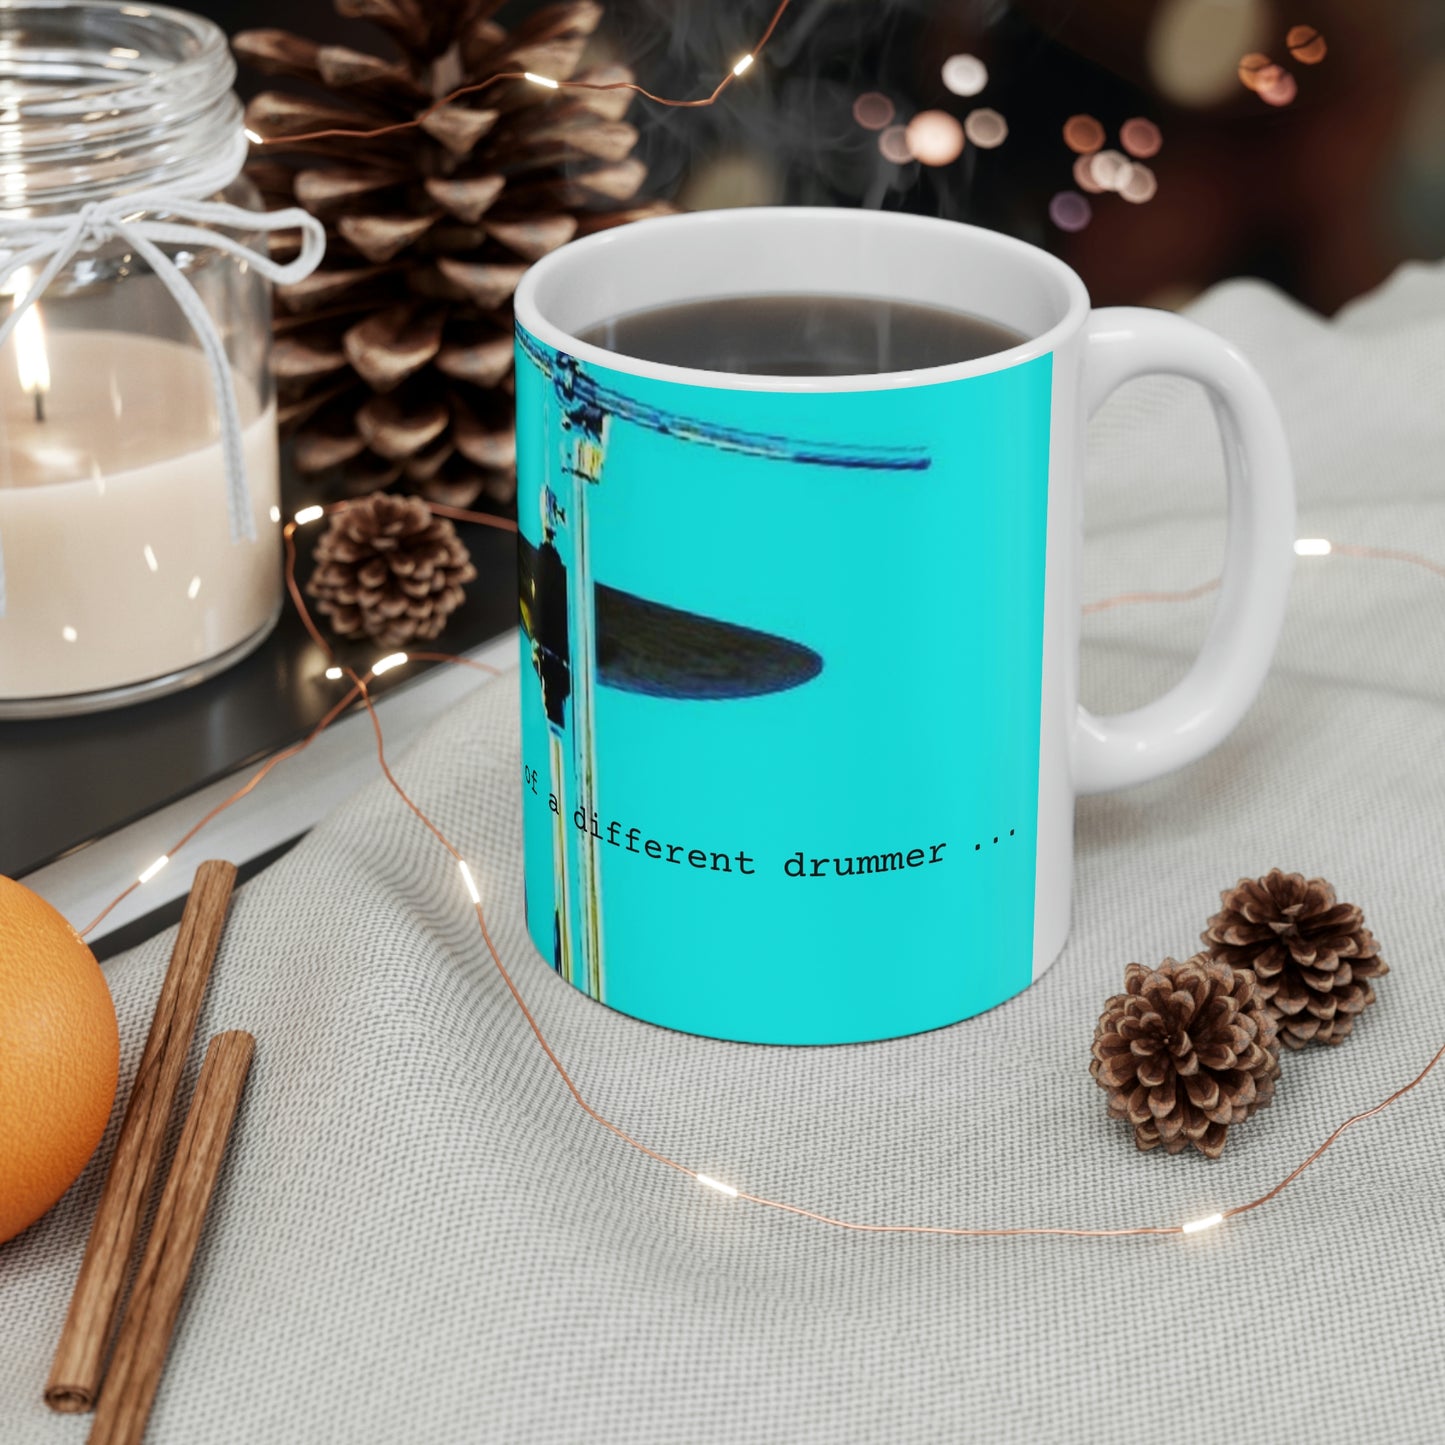 Dance to the beat of a different drummer - Ceramic Mug 11oz - Limited Edition